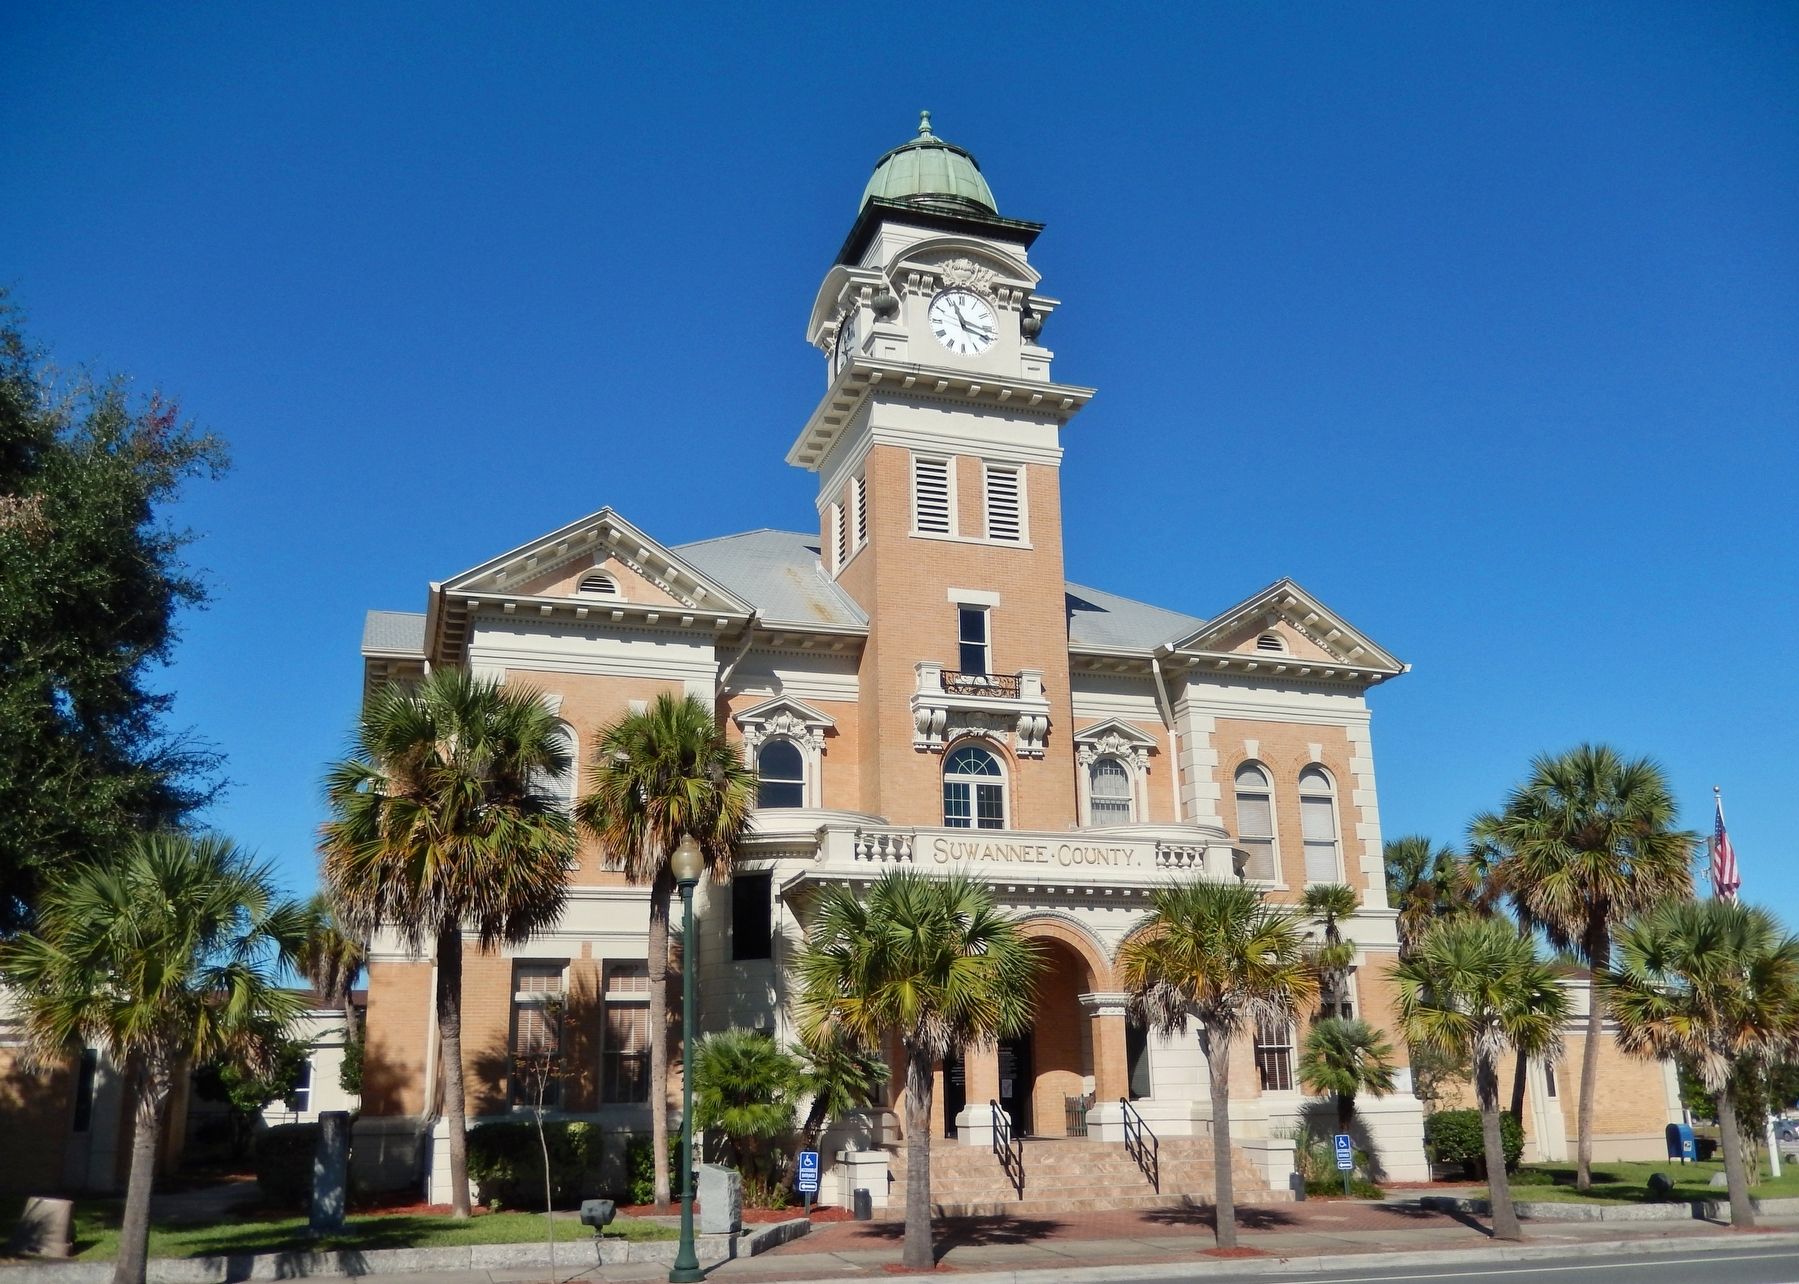 Suwannee County Courthouse (<i>located beside marker</i>) image. Click for full size.